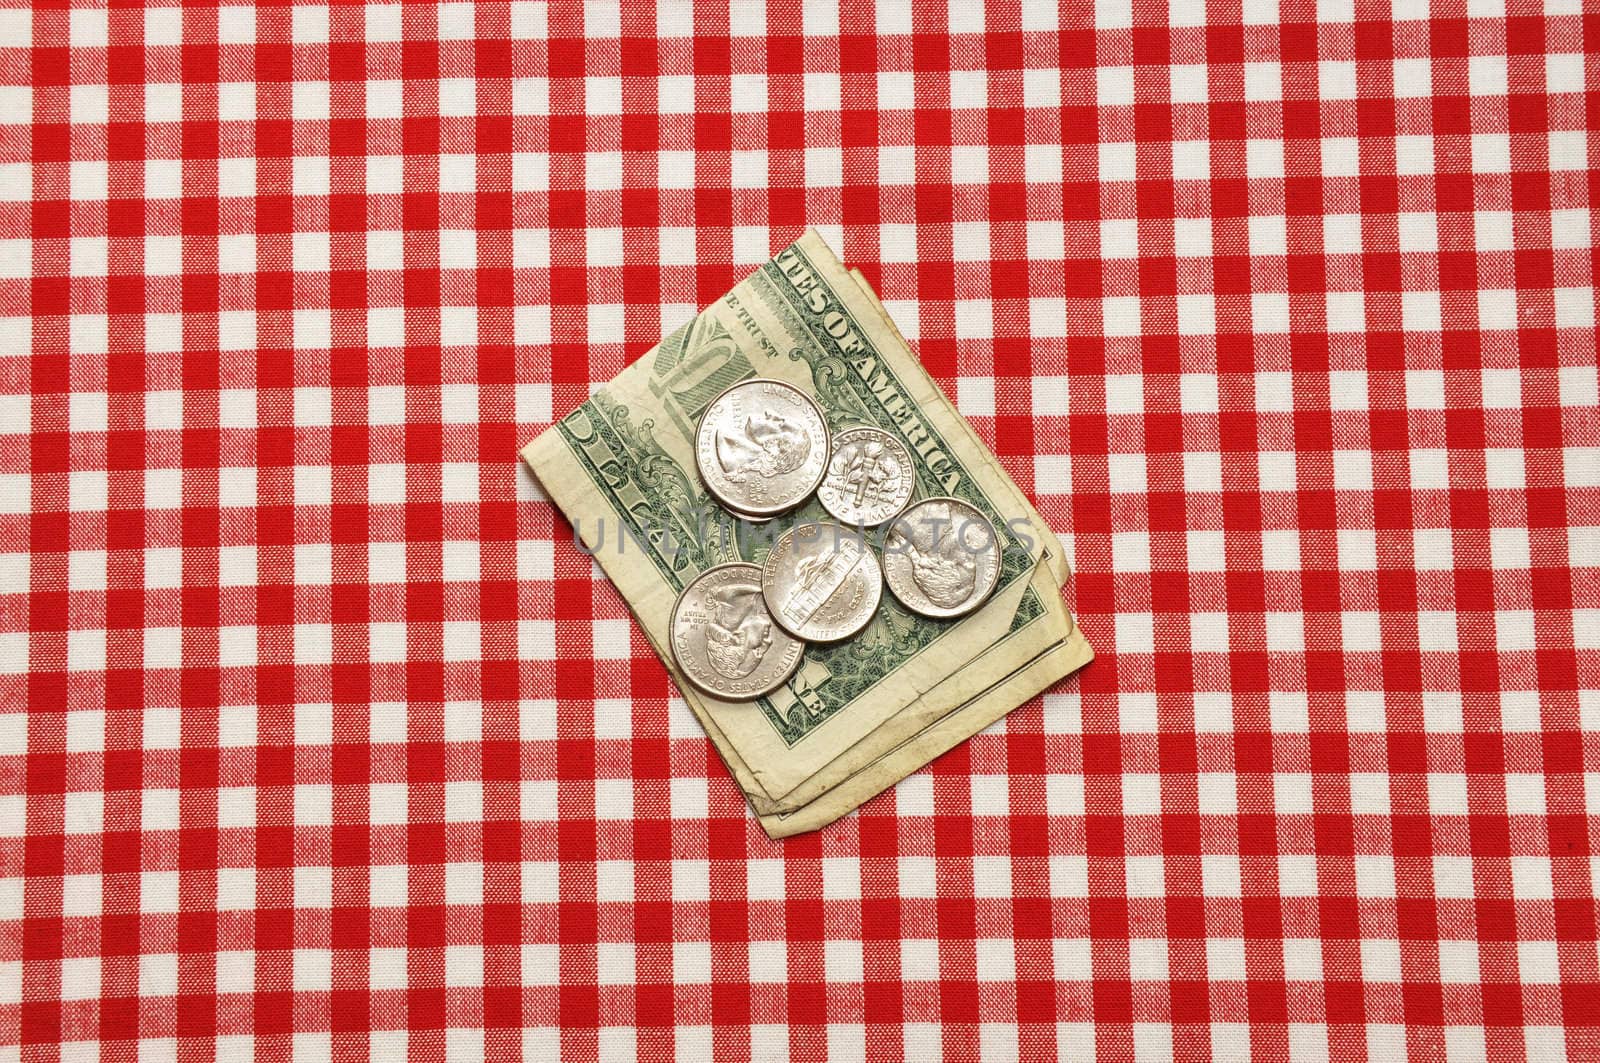 Tip left on restaurant table.  Bills and coins on red gingham tablecloth.  